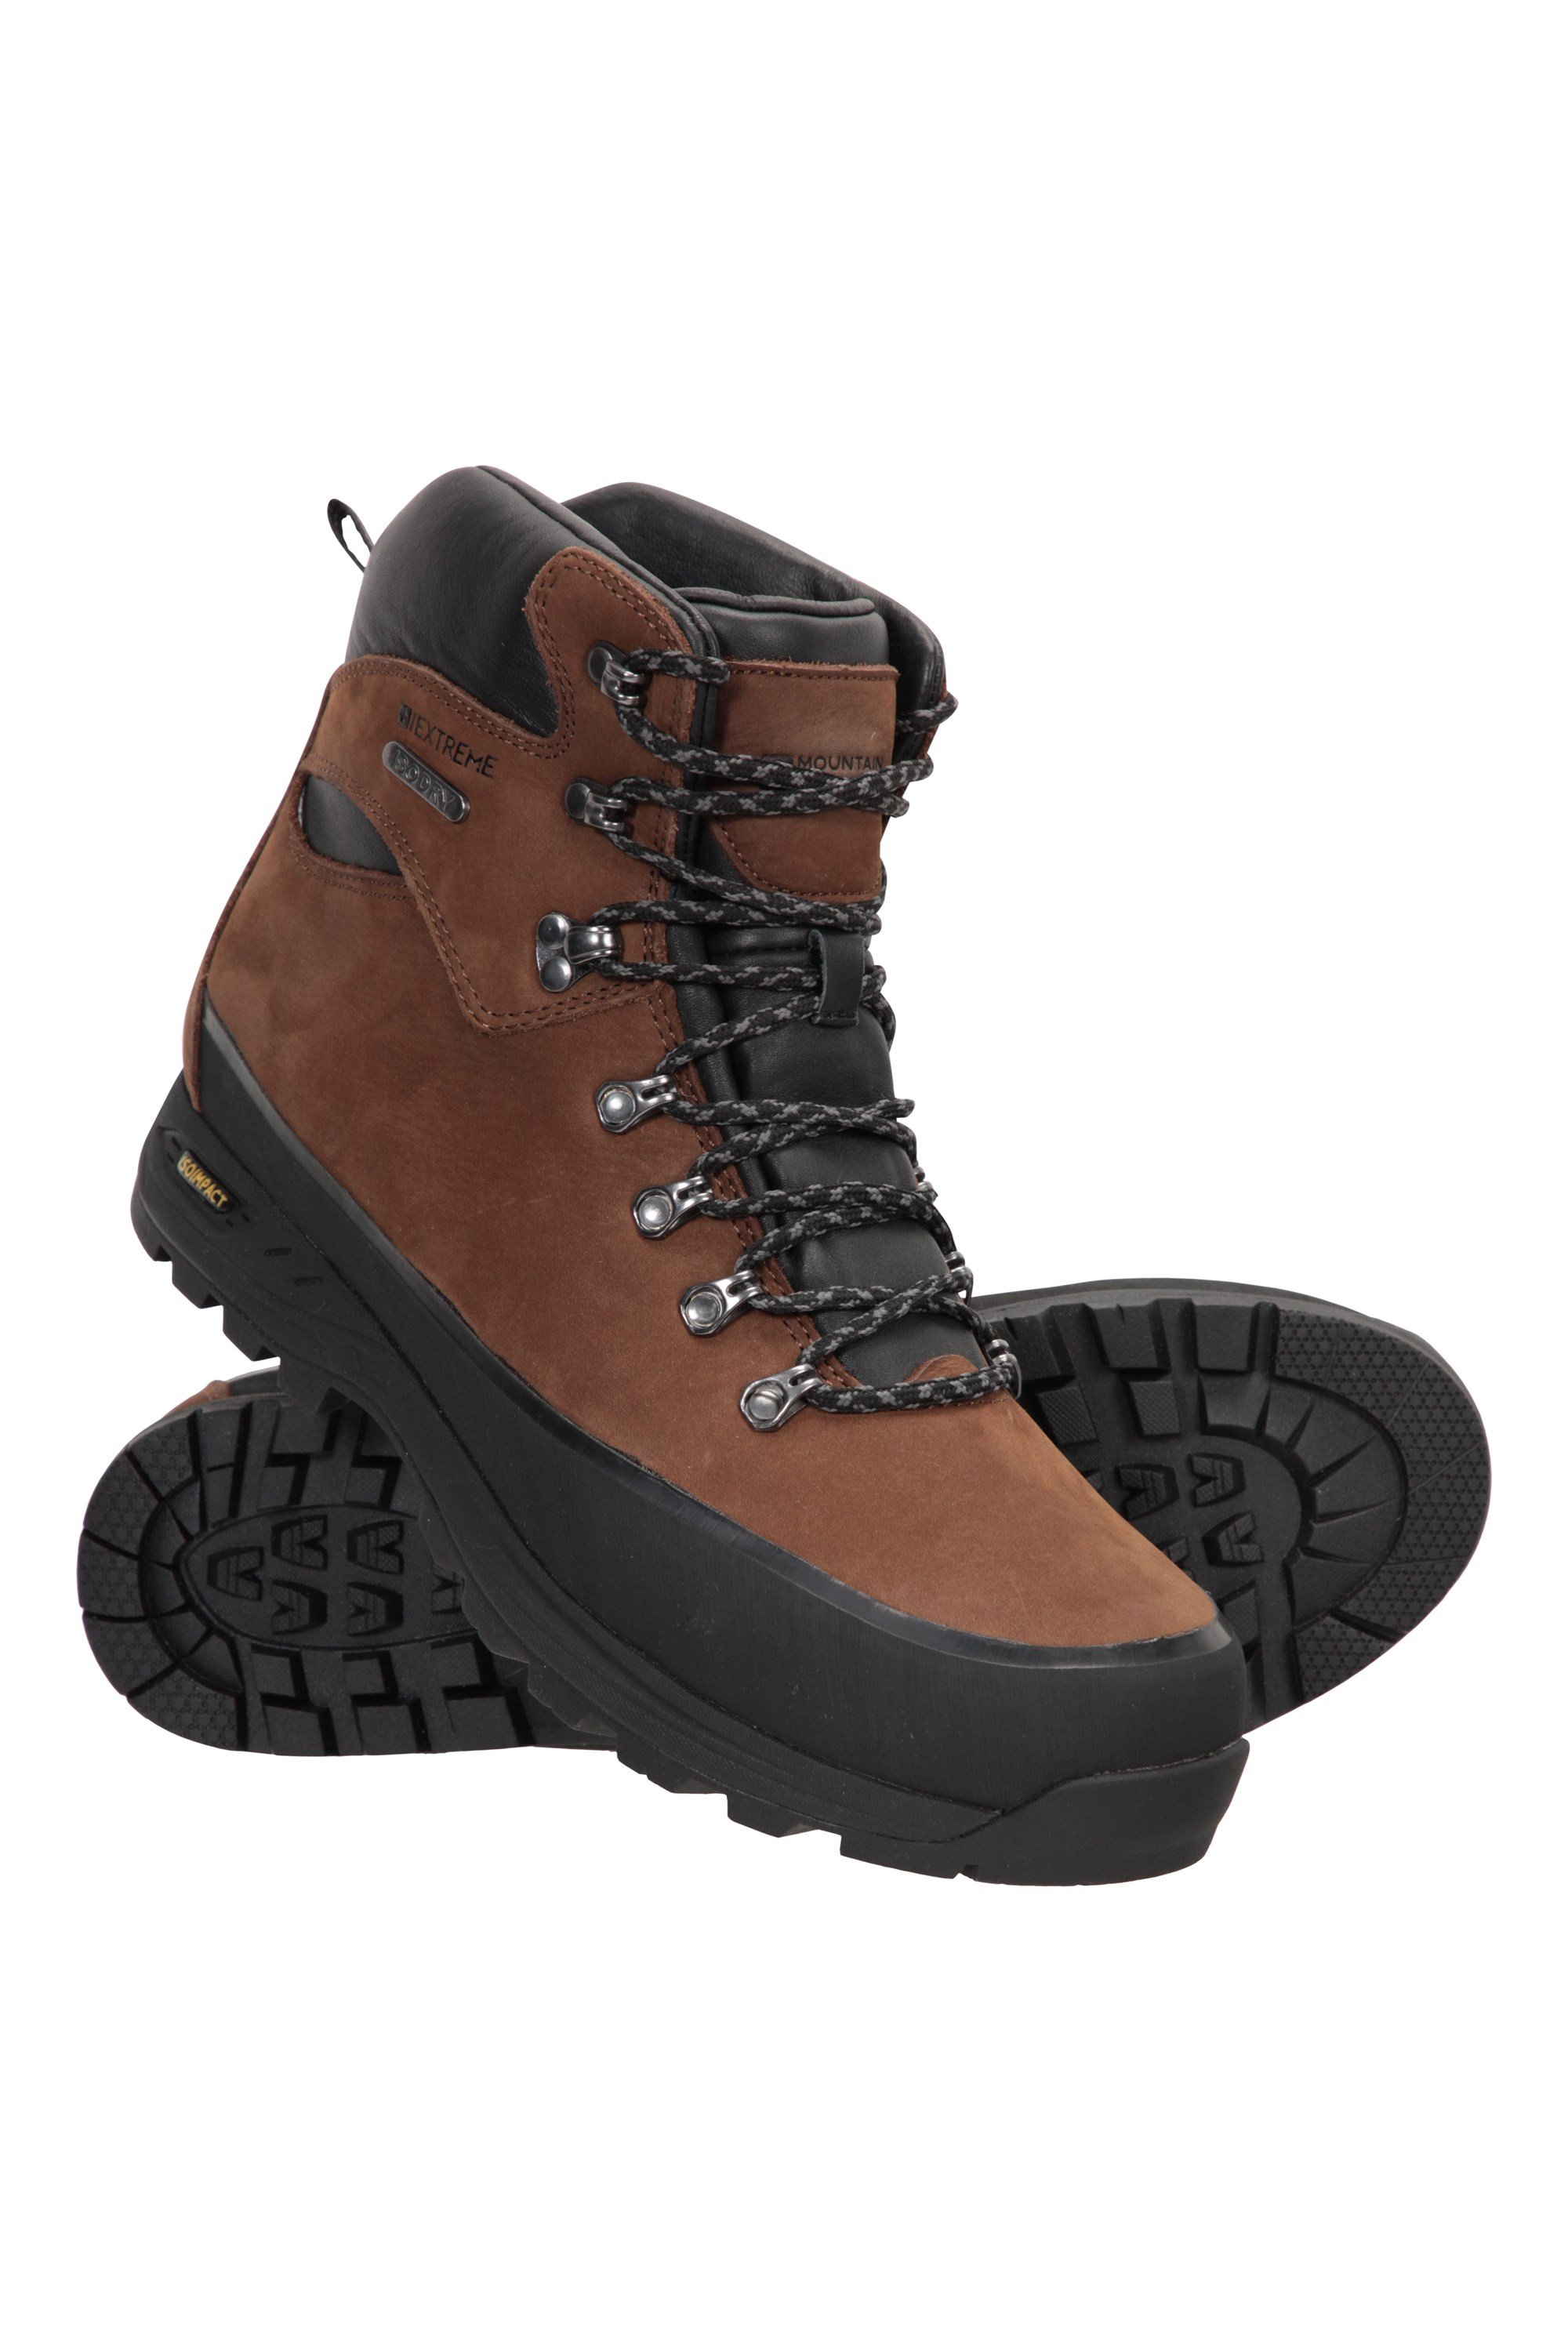 mens brown leather waterproof boots